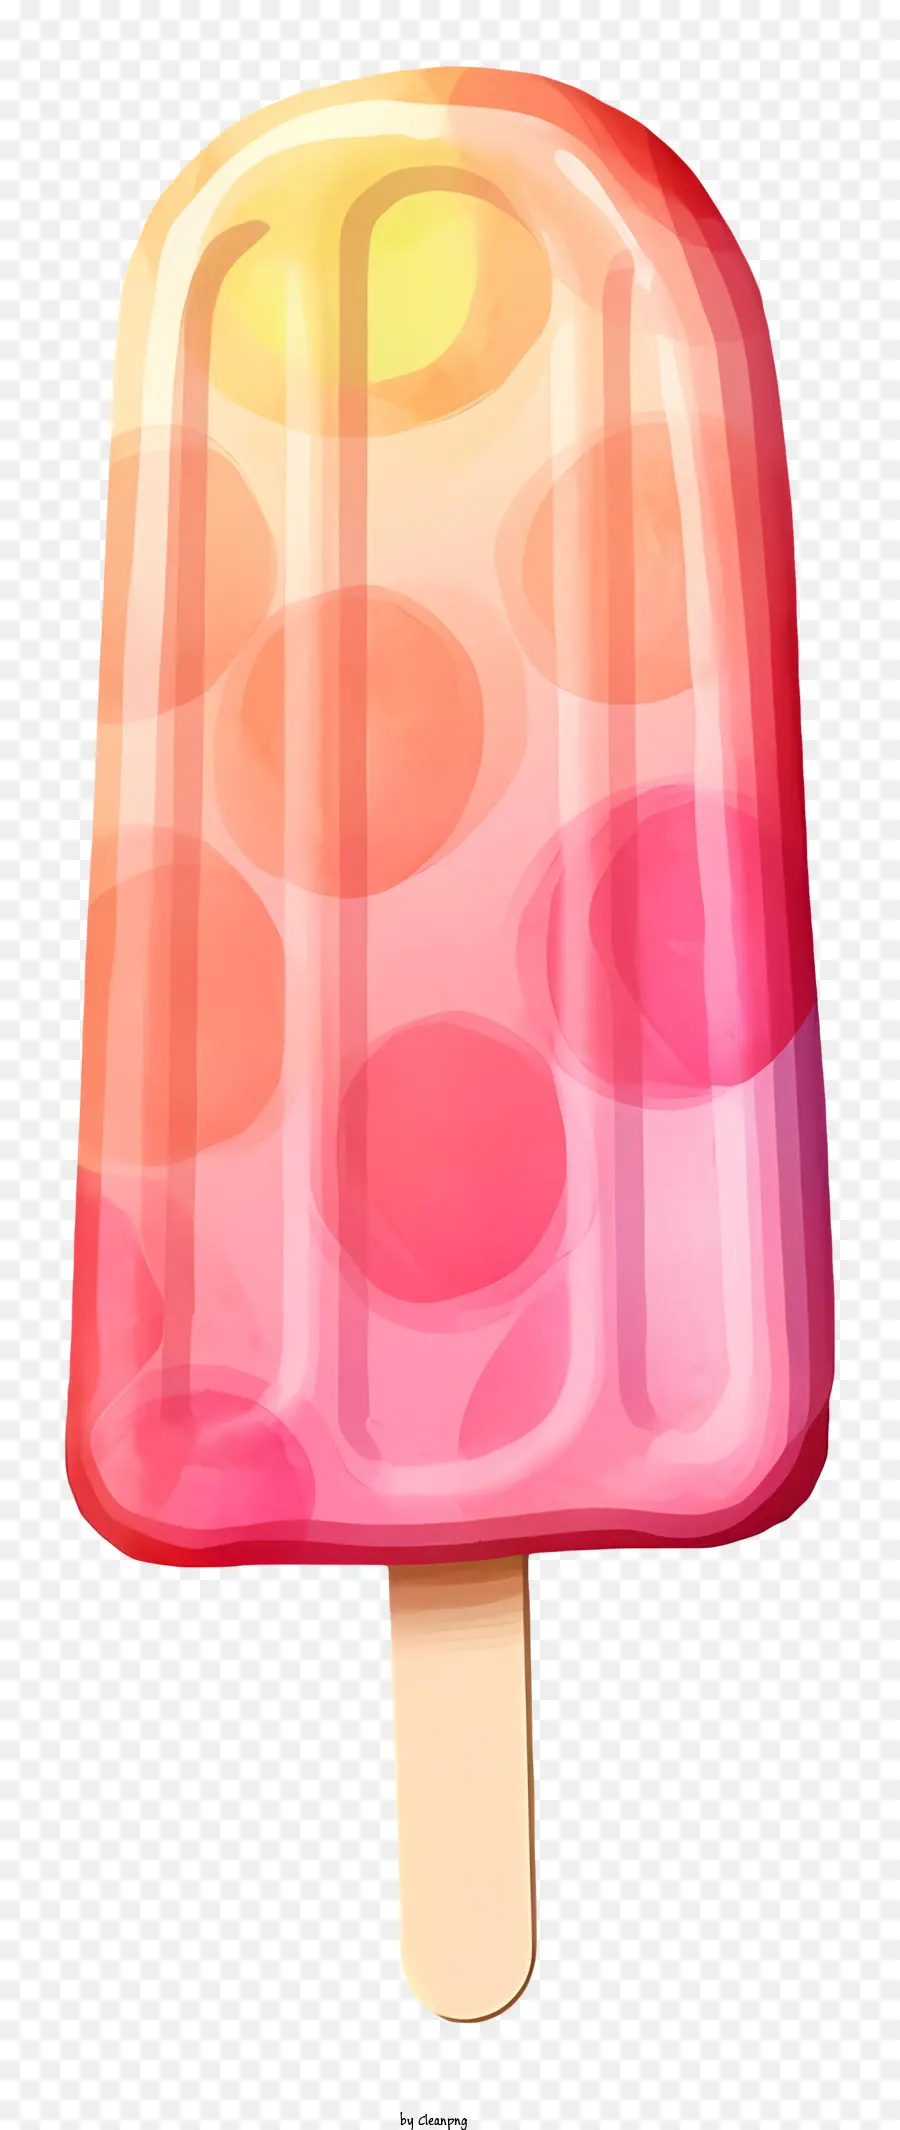 popsicle on a stick bright pink popsicle orange popsicle with bubbles black background display small round popsicle